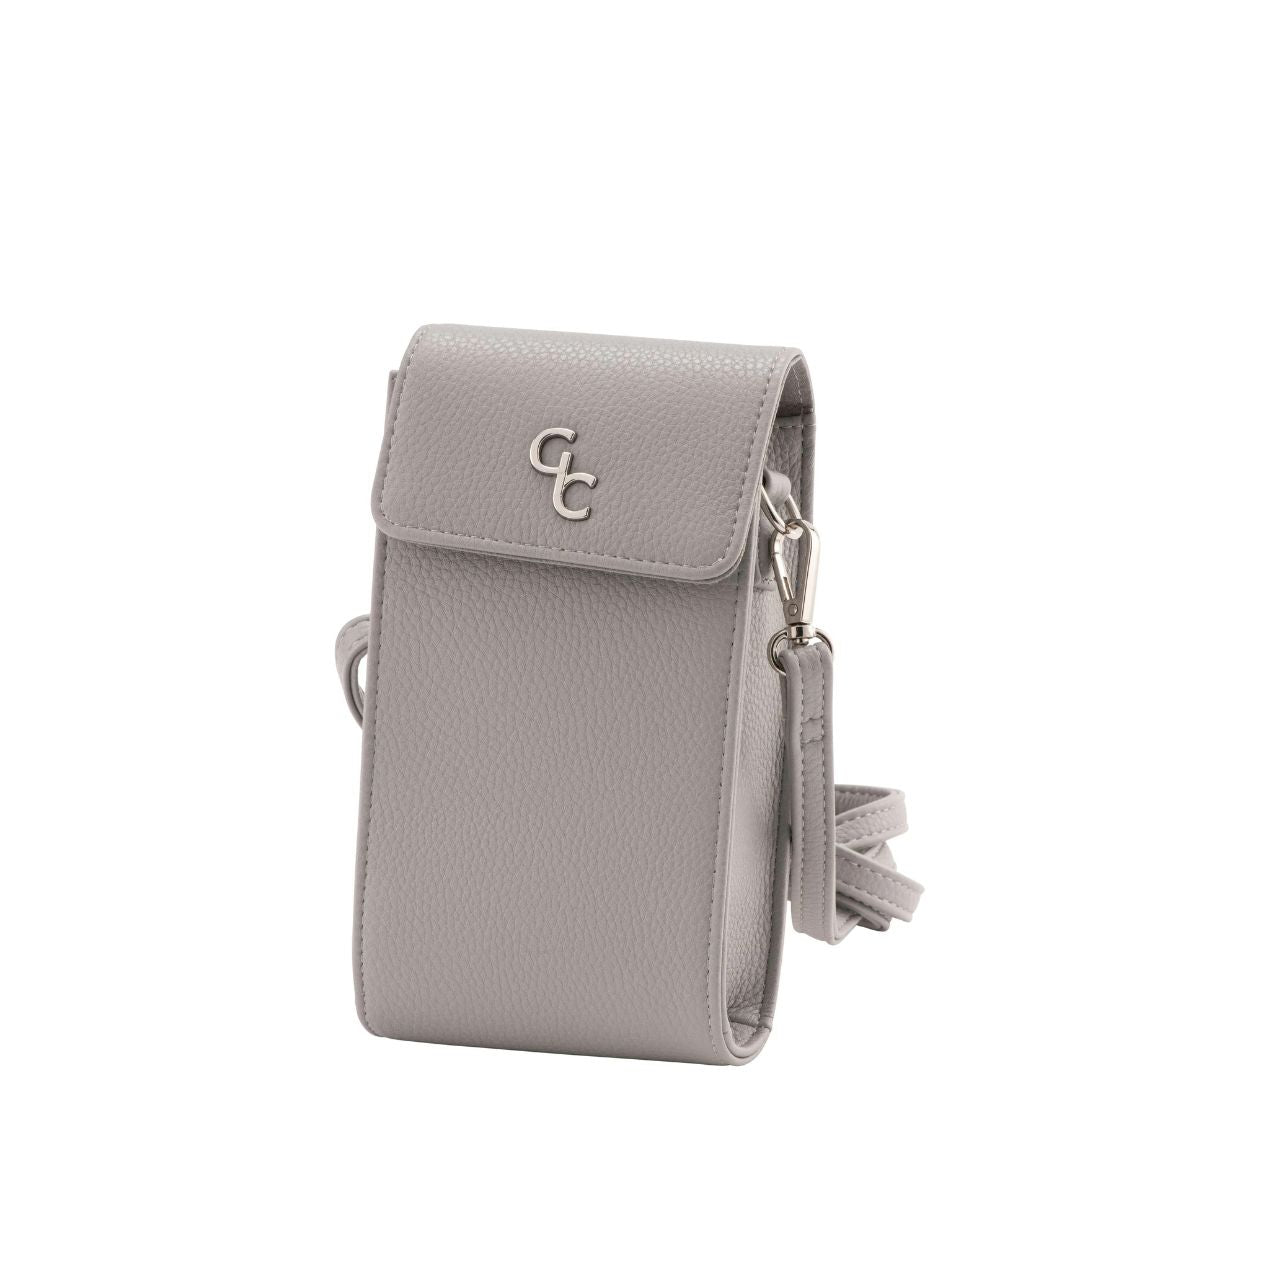 Galway Crystal Fashion Mini Crossbody Handbag - Grey  Introducing the new must have accessory that is truly functional. Our Light Weight, Slim, Sleek, Crossbody bag is designed to hold the most essential accessory: Your mobile phone. There is nothing more liberating than carrying a lightweight bag that carries your essentials.